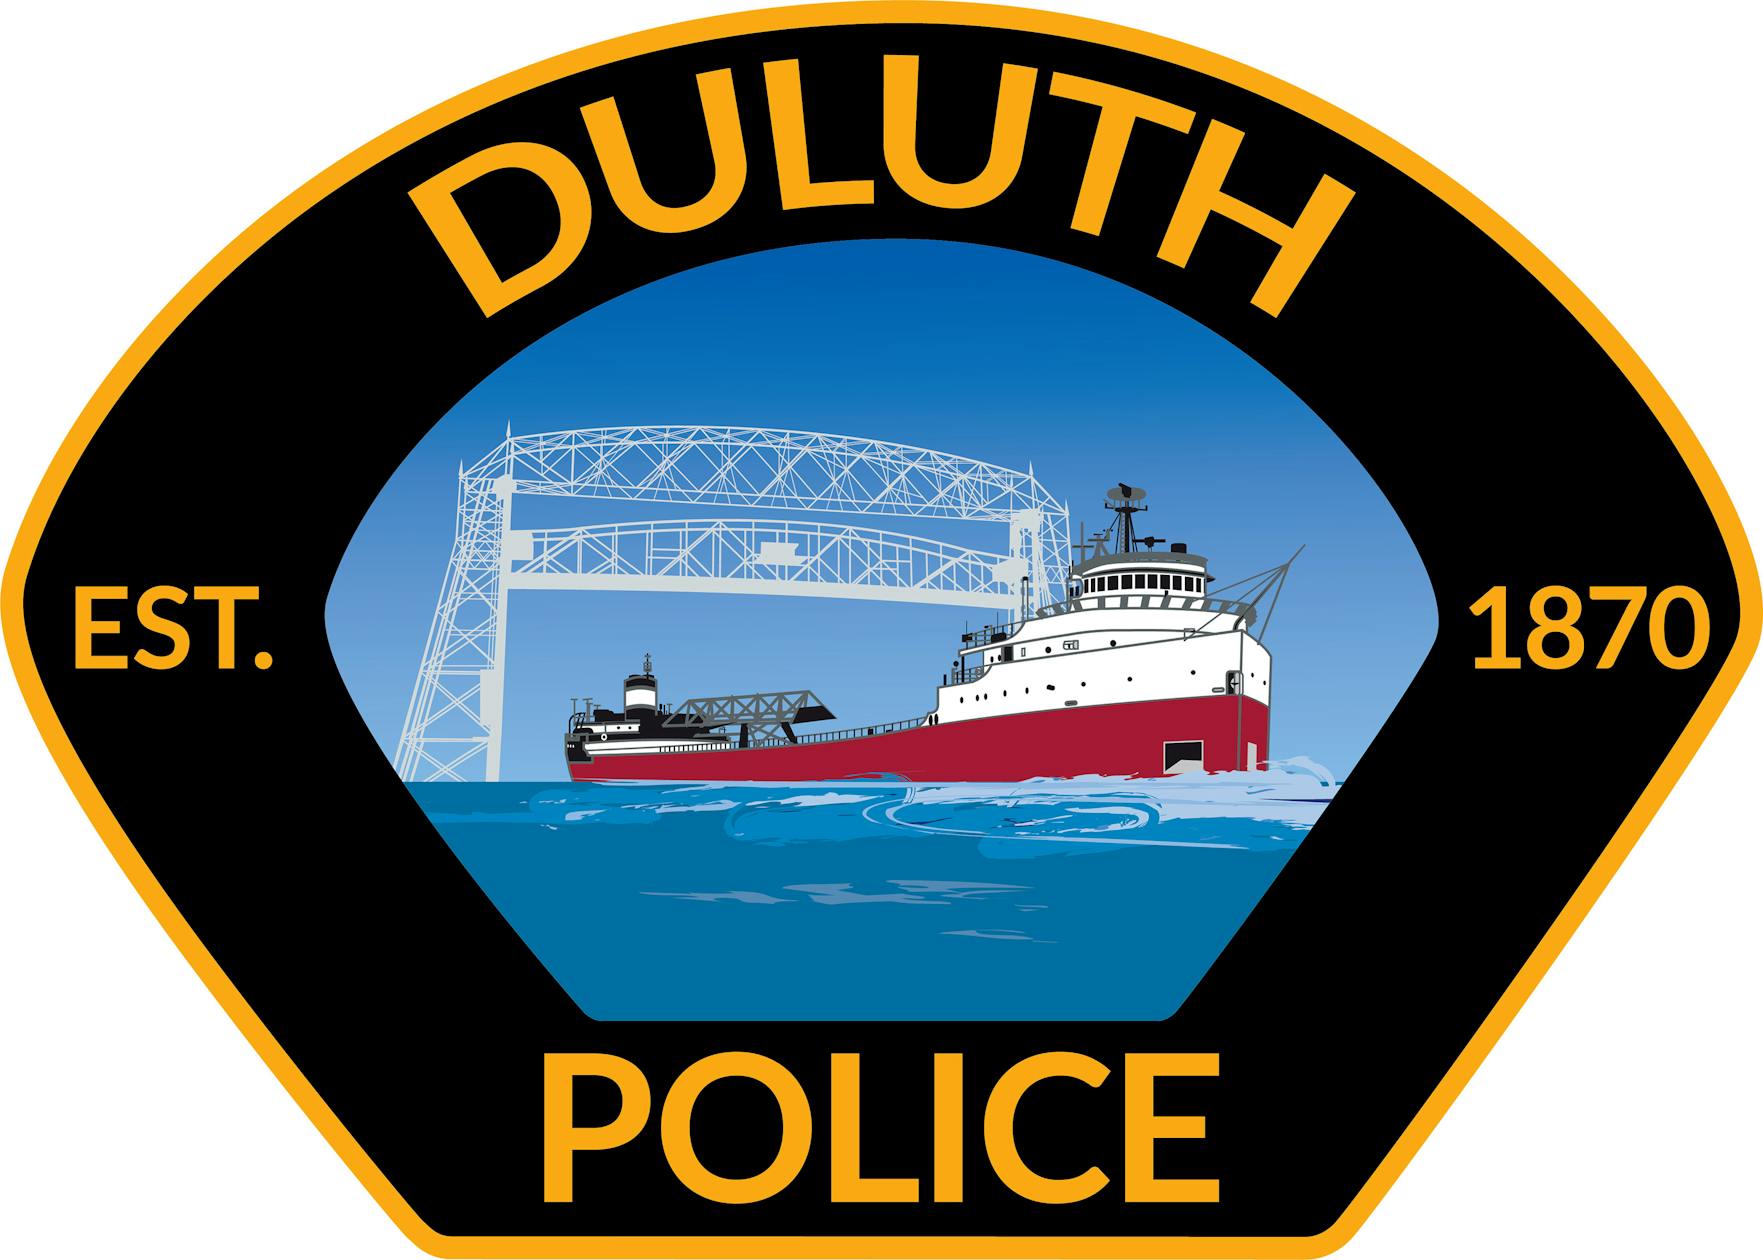 Man who allegedly stabbed Duluth woman is arrested in Michigan two months later